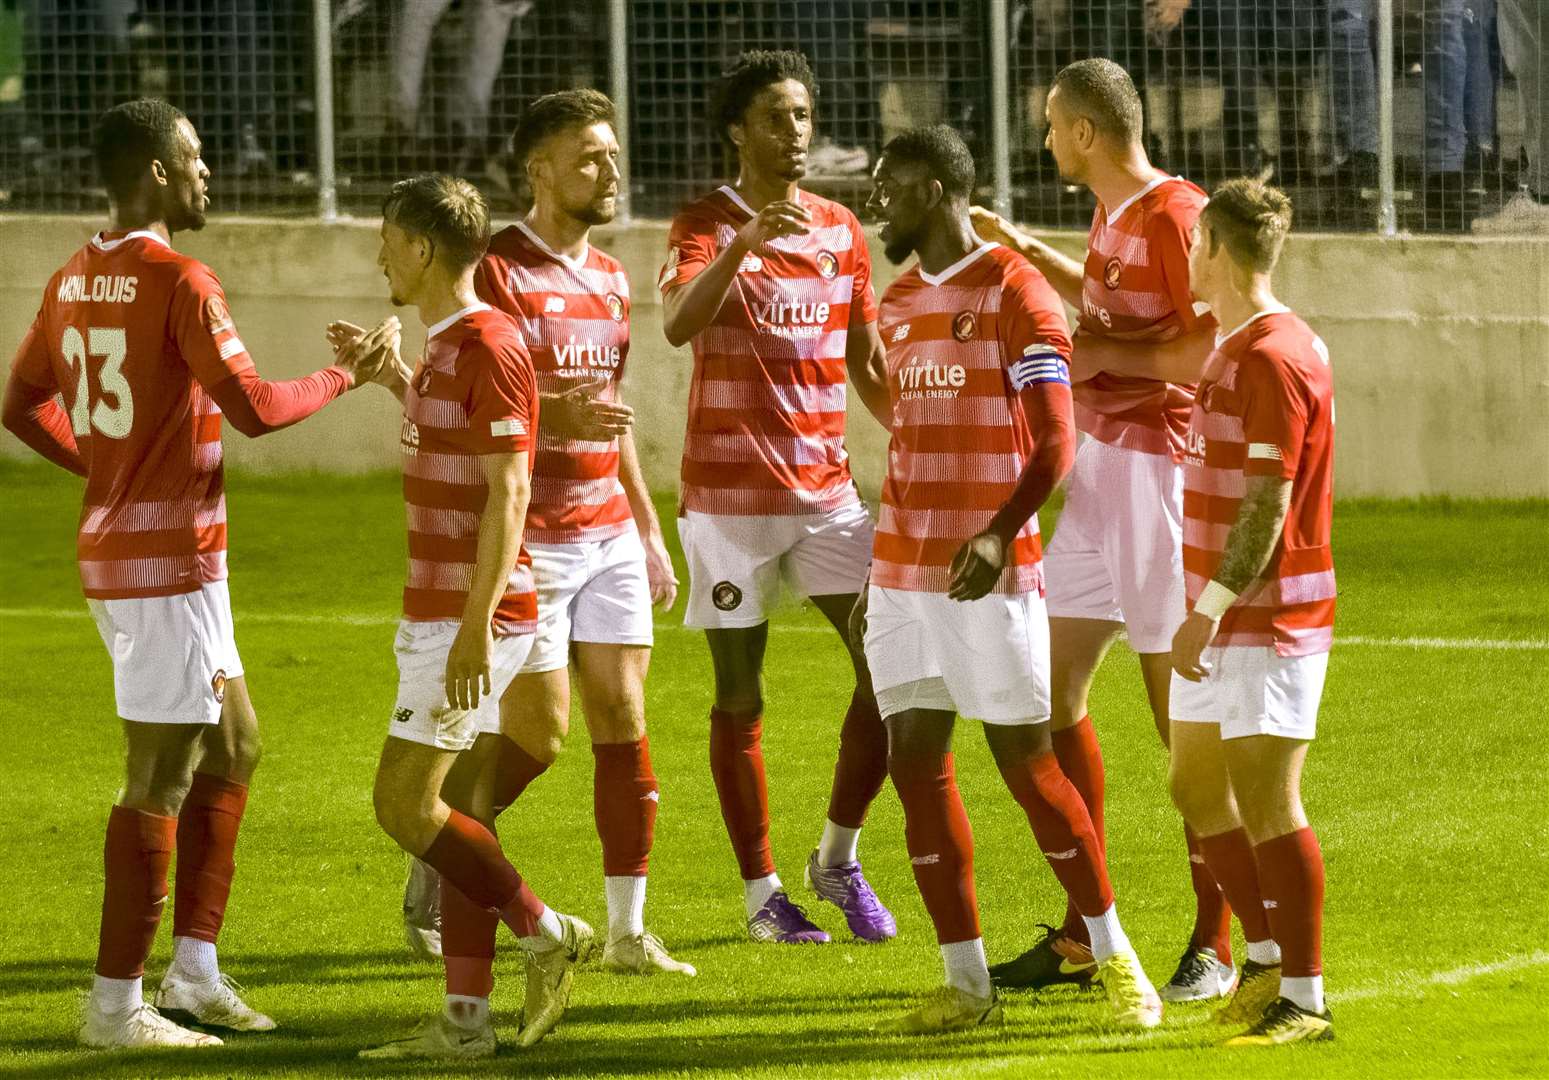 Ebbsfleet's players celebrate during their 3-1 National League South win over St Albans City. Picture: Ed Miller/EUFC